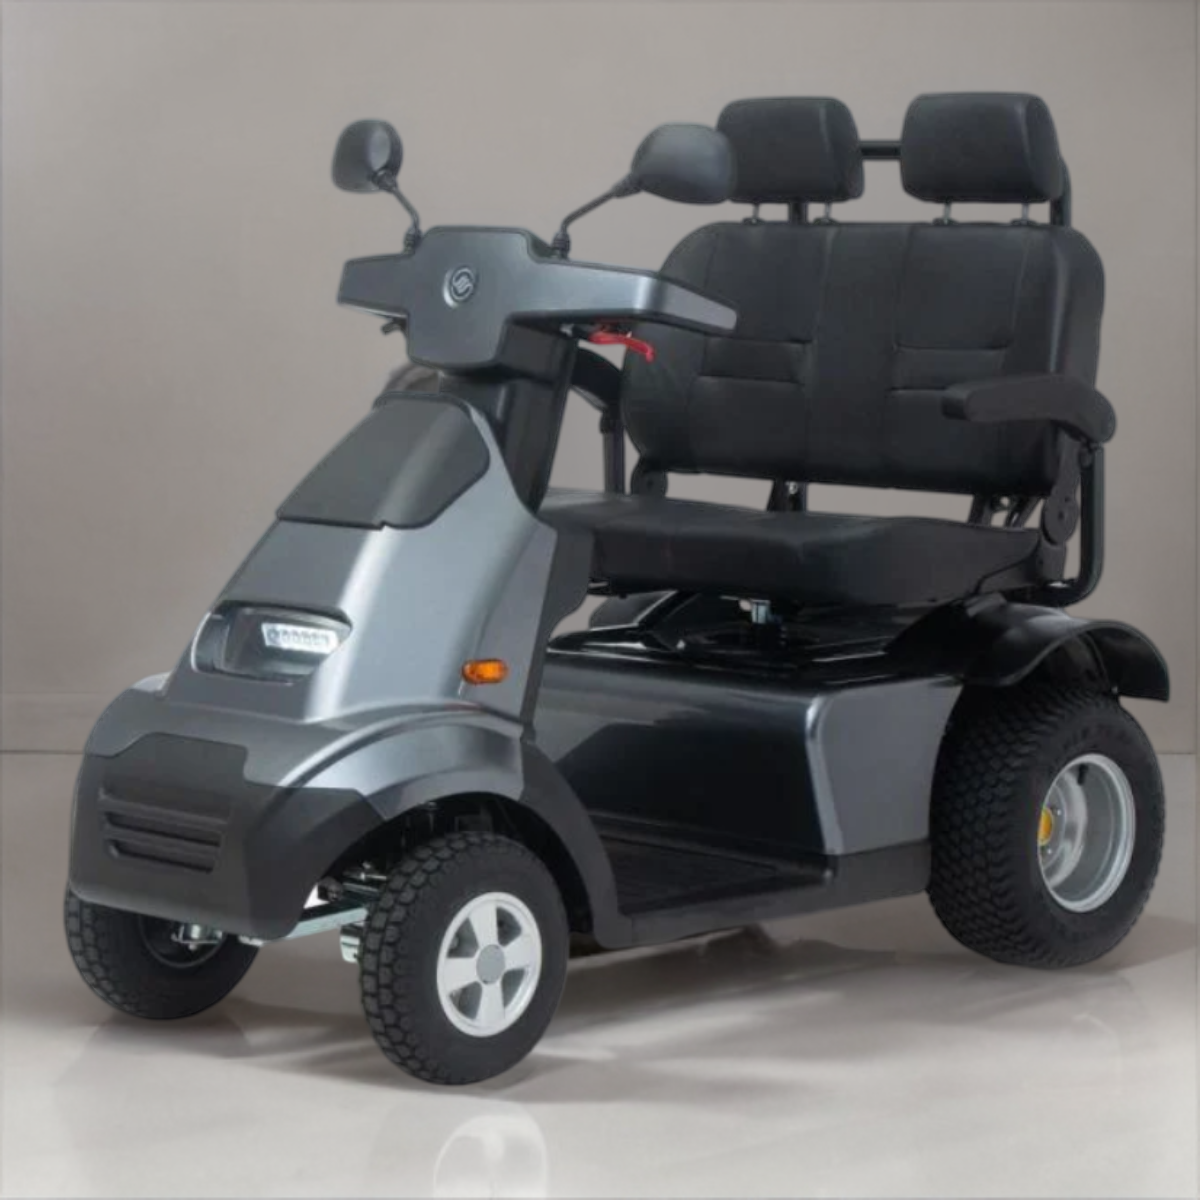 Afikim S4 Heavy Duty On And Off Road Mobility Scooter